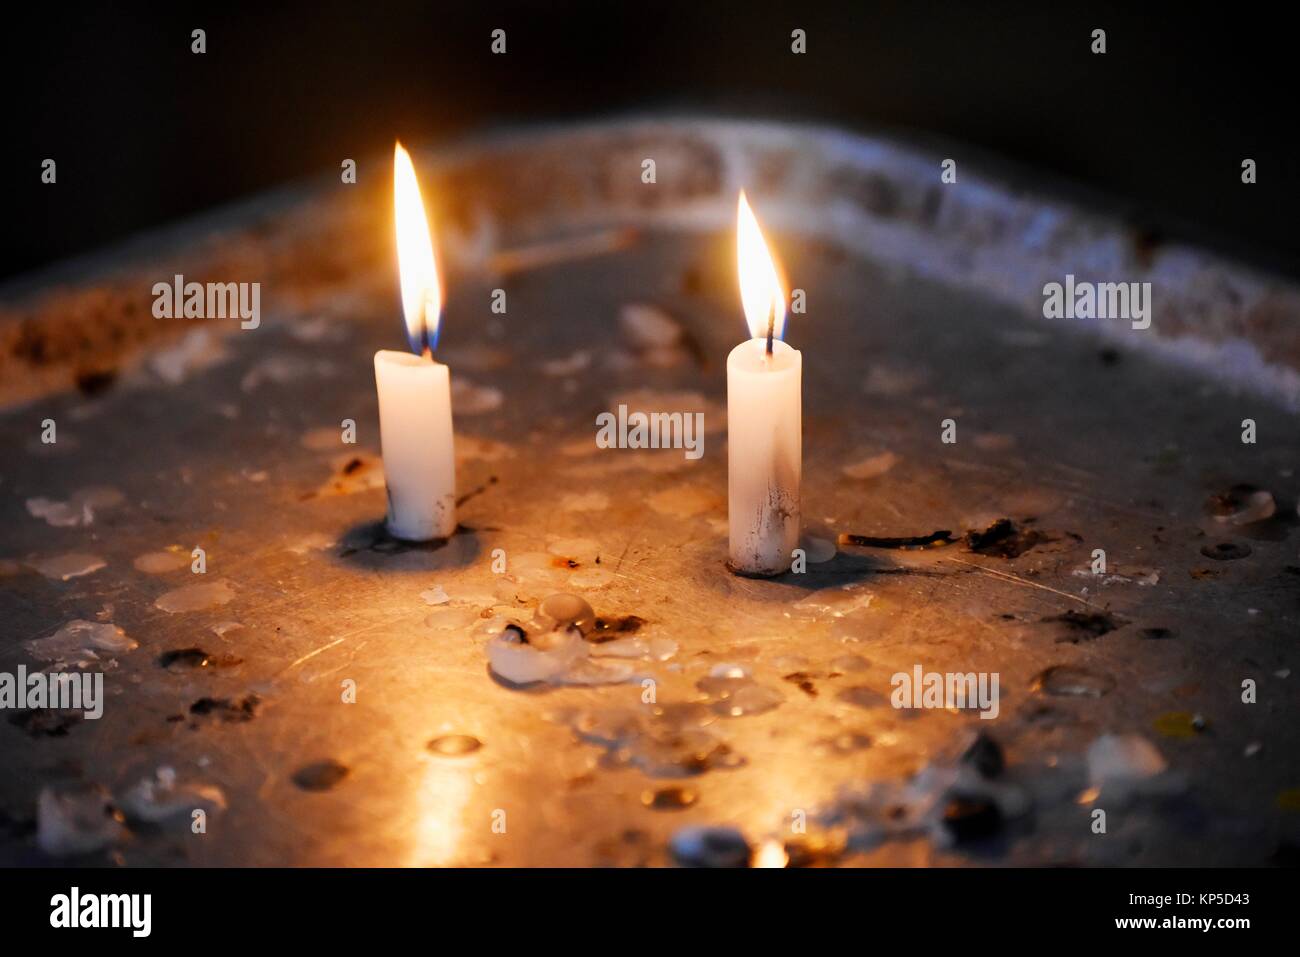 Candles burning in a chuch, Trinidad,Cuba. Stock Photo